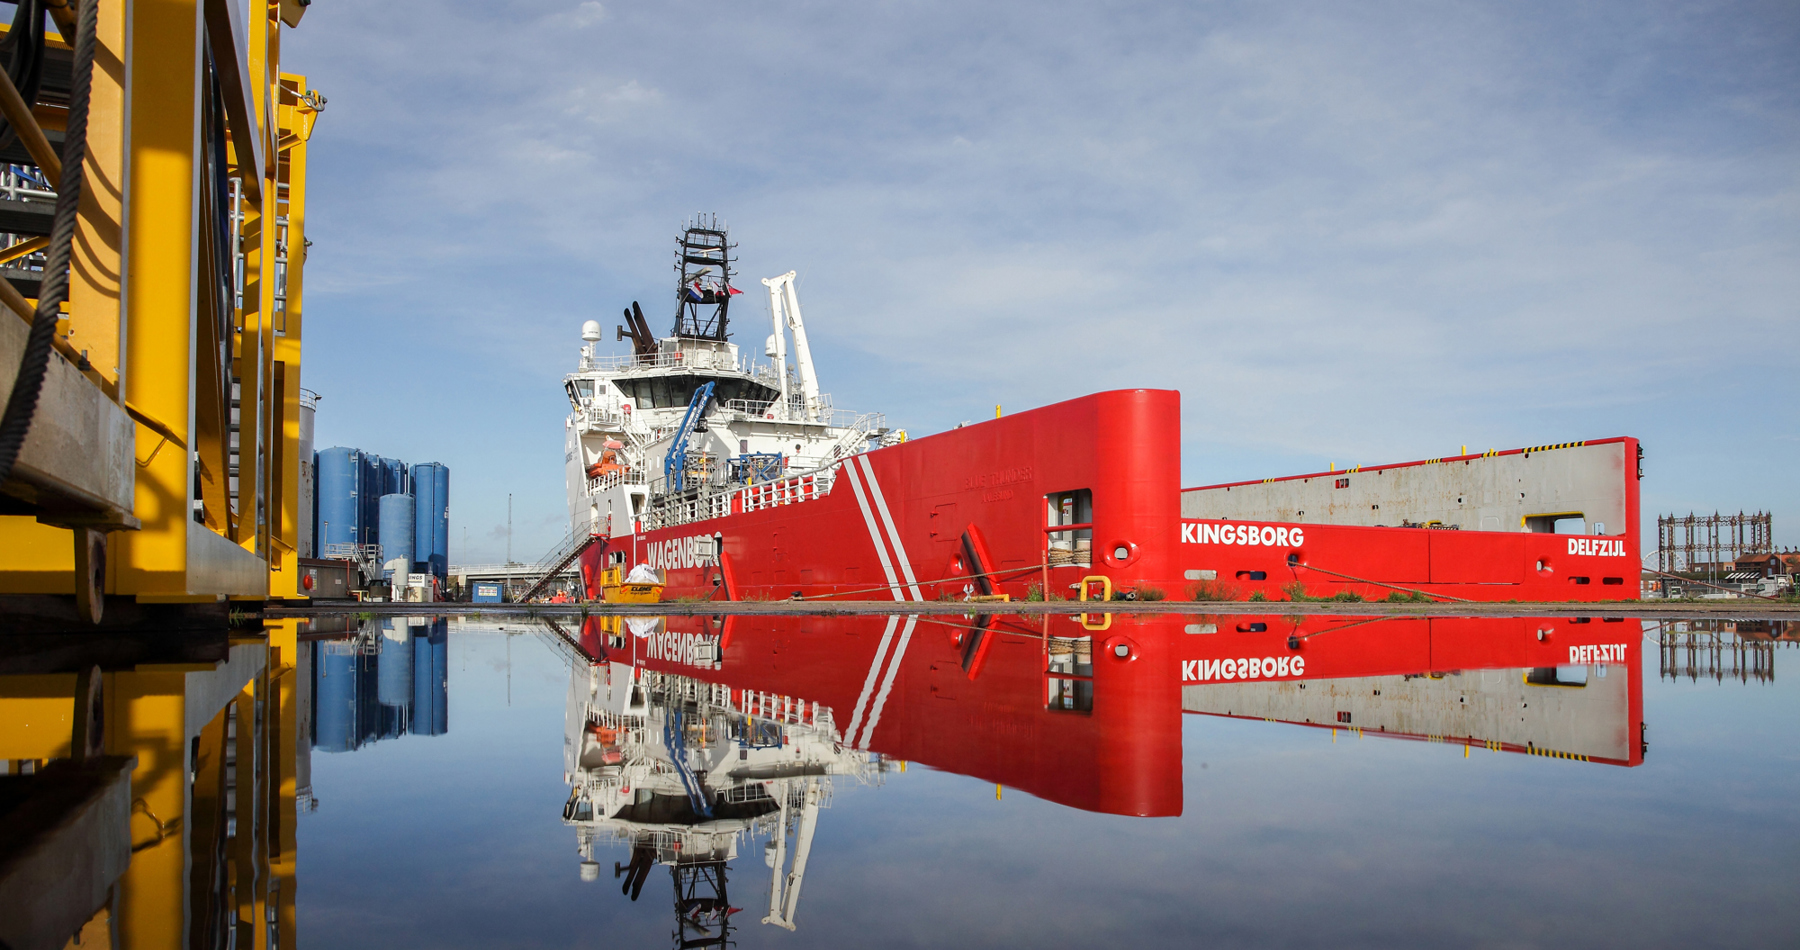 Subsea support vessel Kingsborg taken into service after conversion project